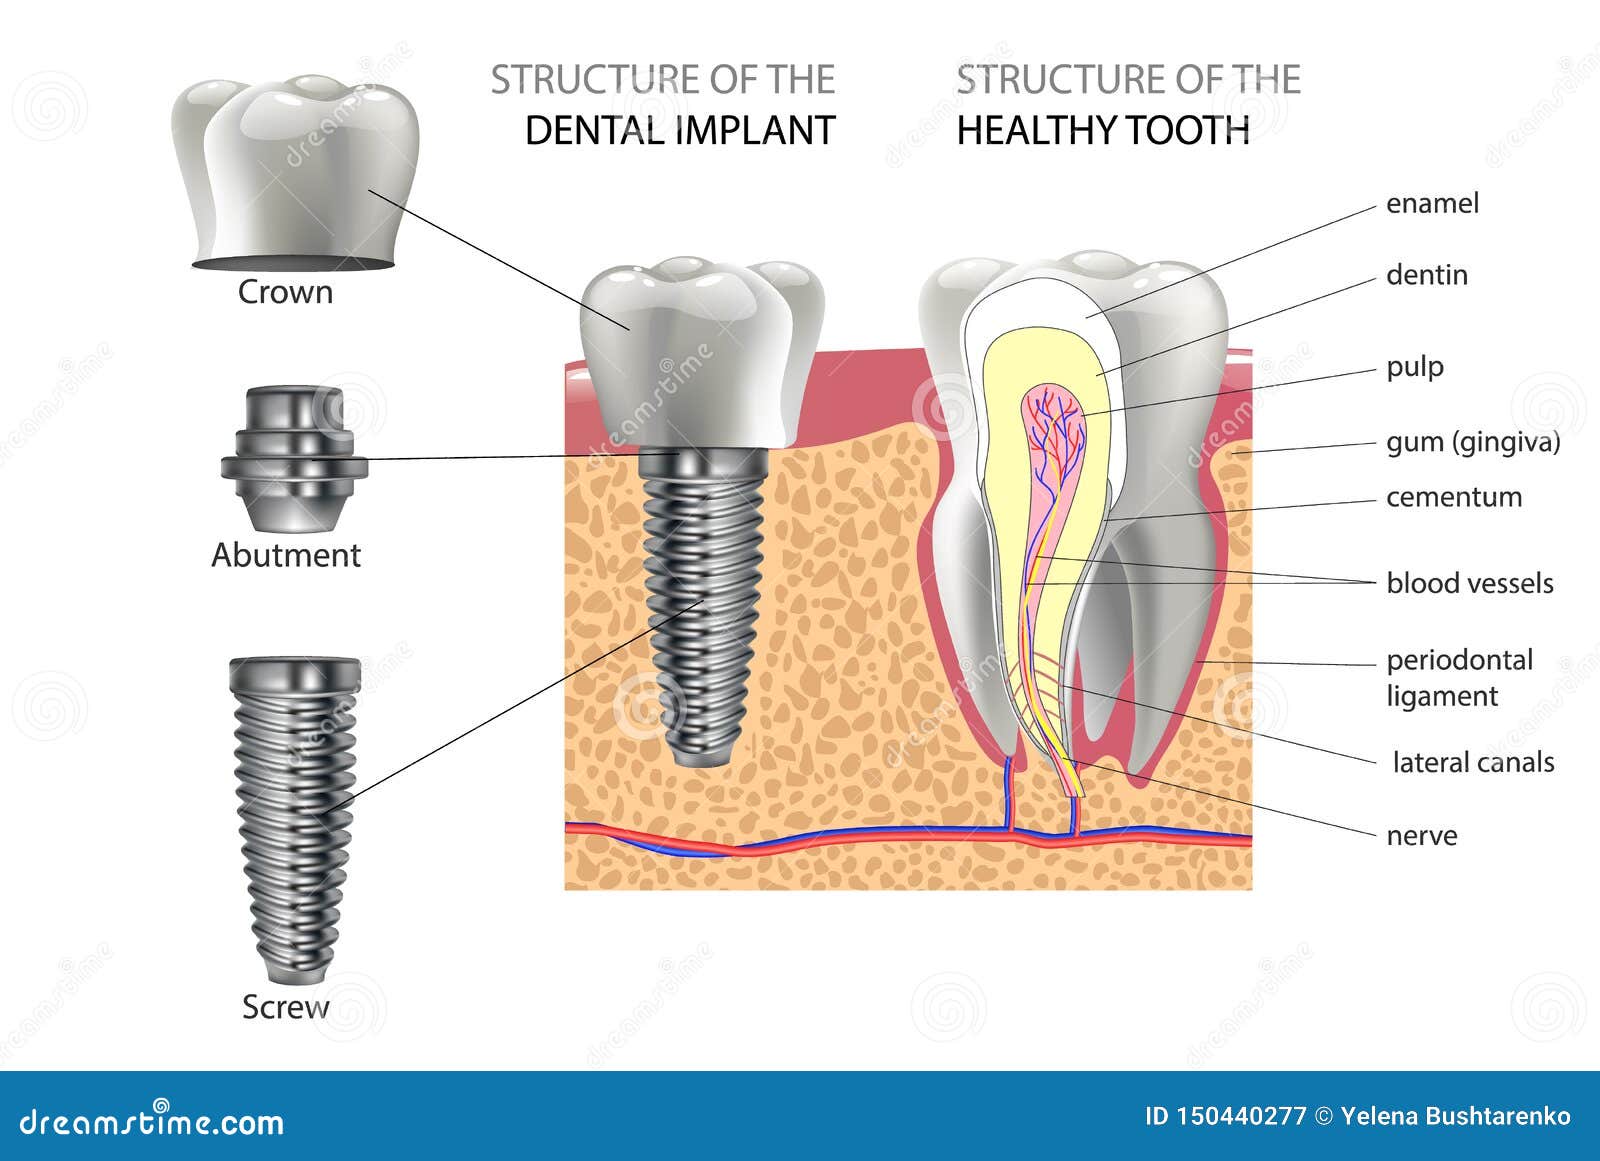 realistic healthy tooth and structure, dental implant with all parts: crown, abutment, screw.